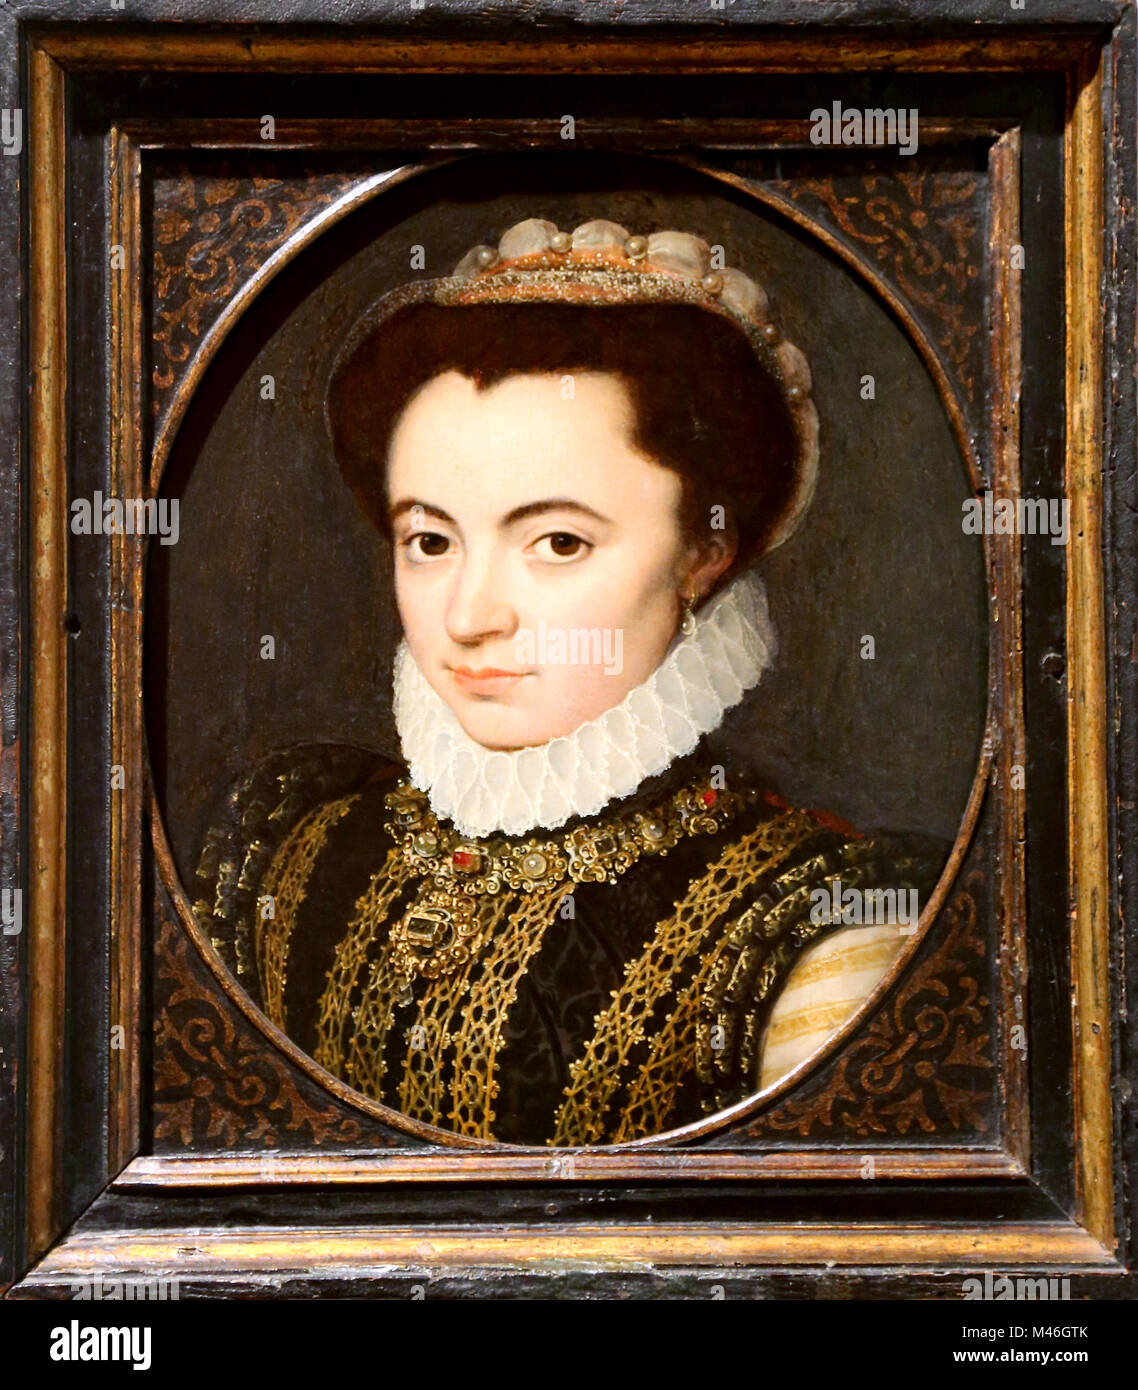 Portrait of Maria of Parma, Duchess of Parma (1538-1577) painted by Antonis Mor or his workshop, C. 1555. Stock Photo